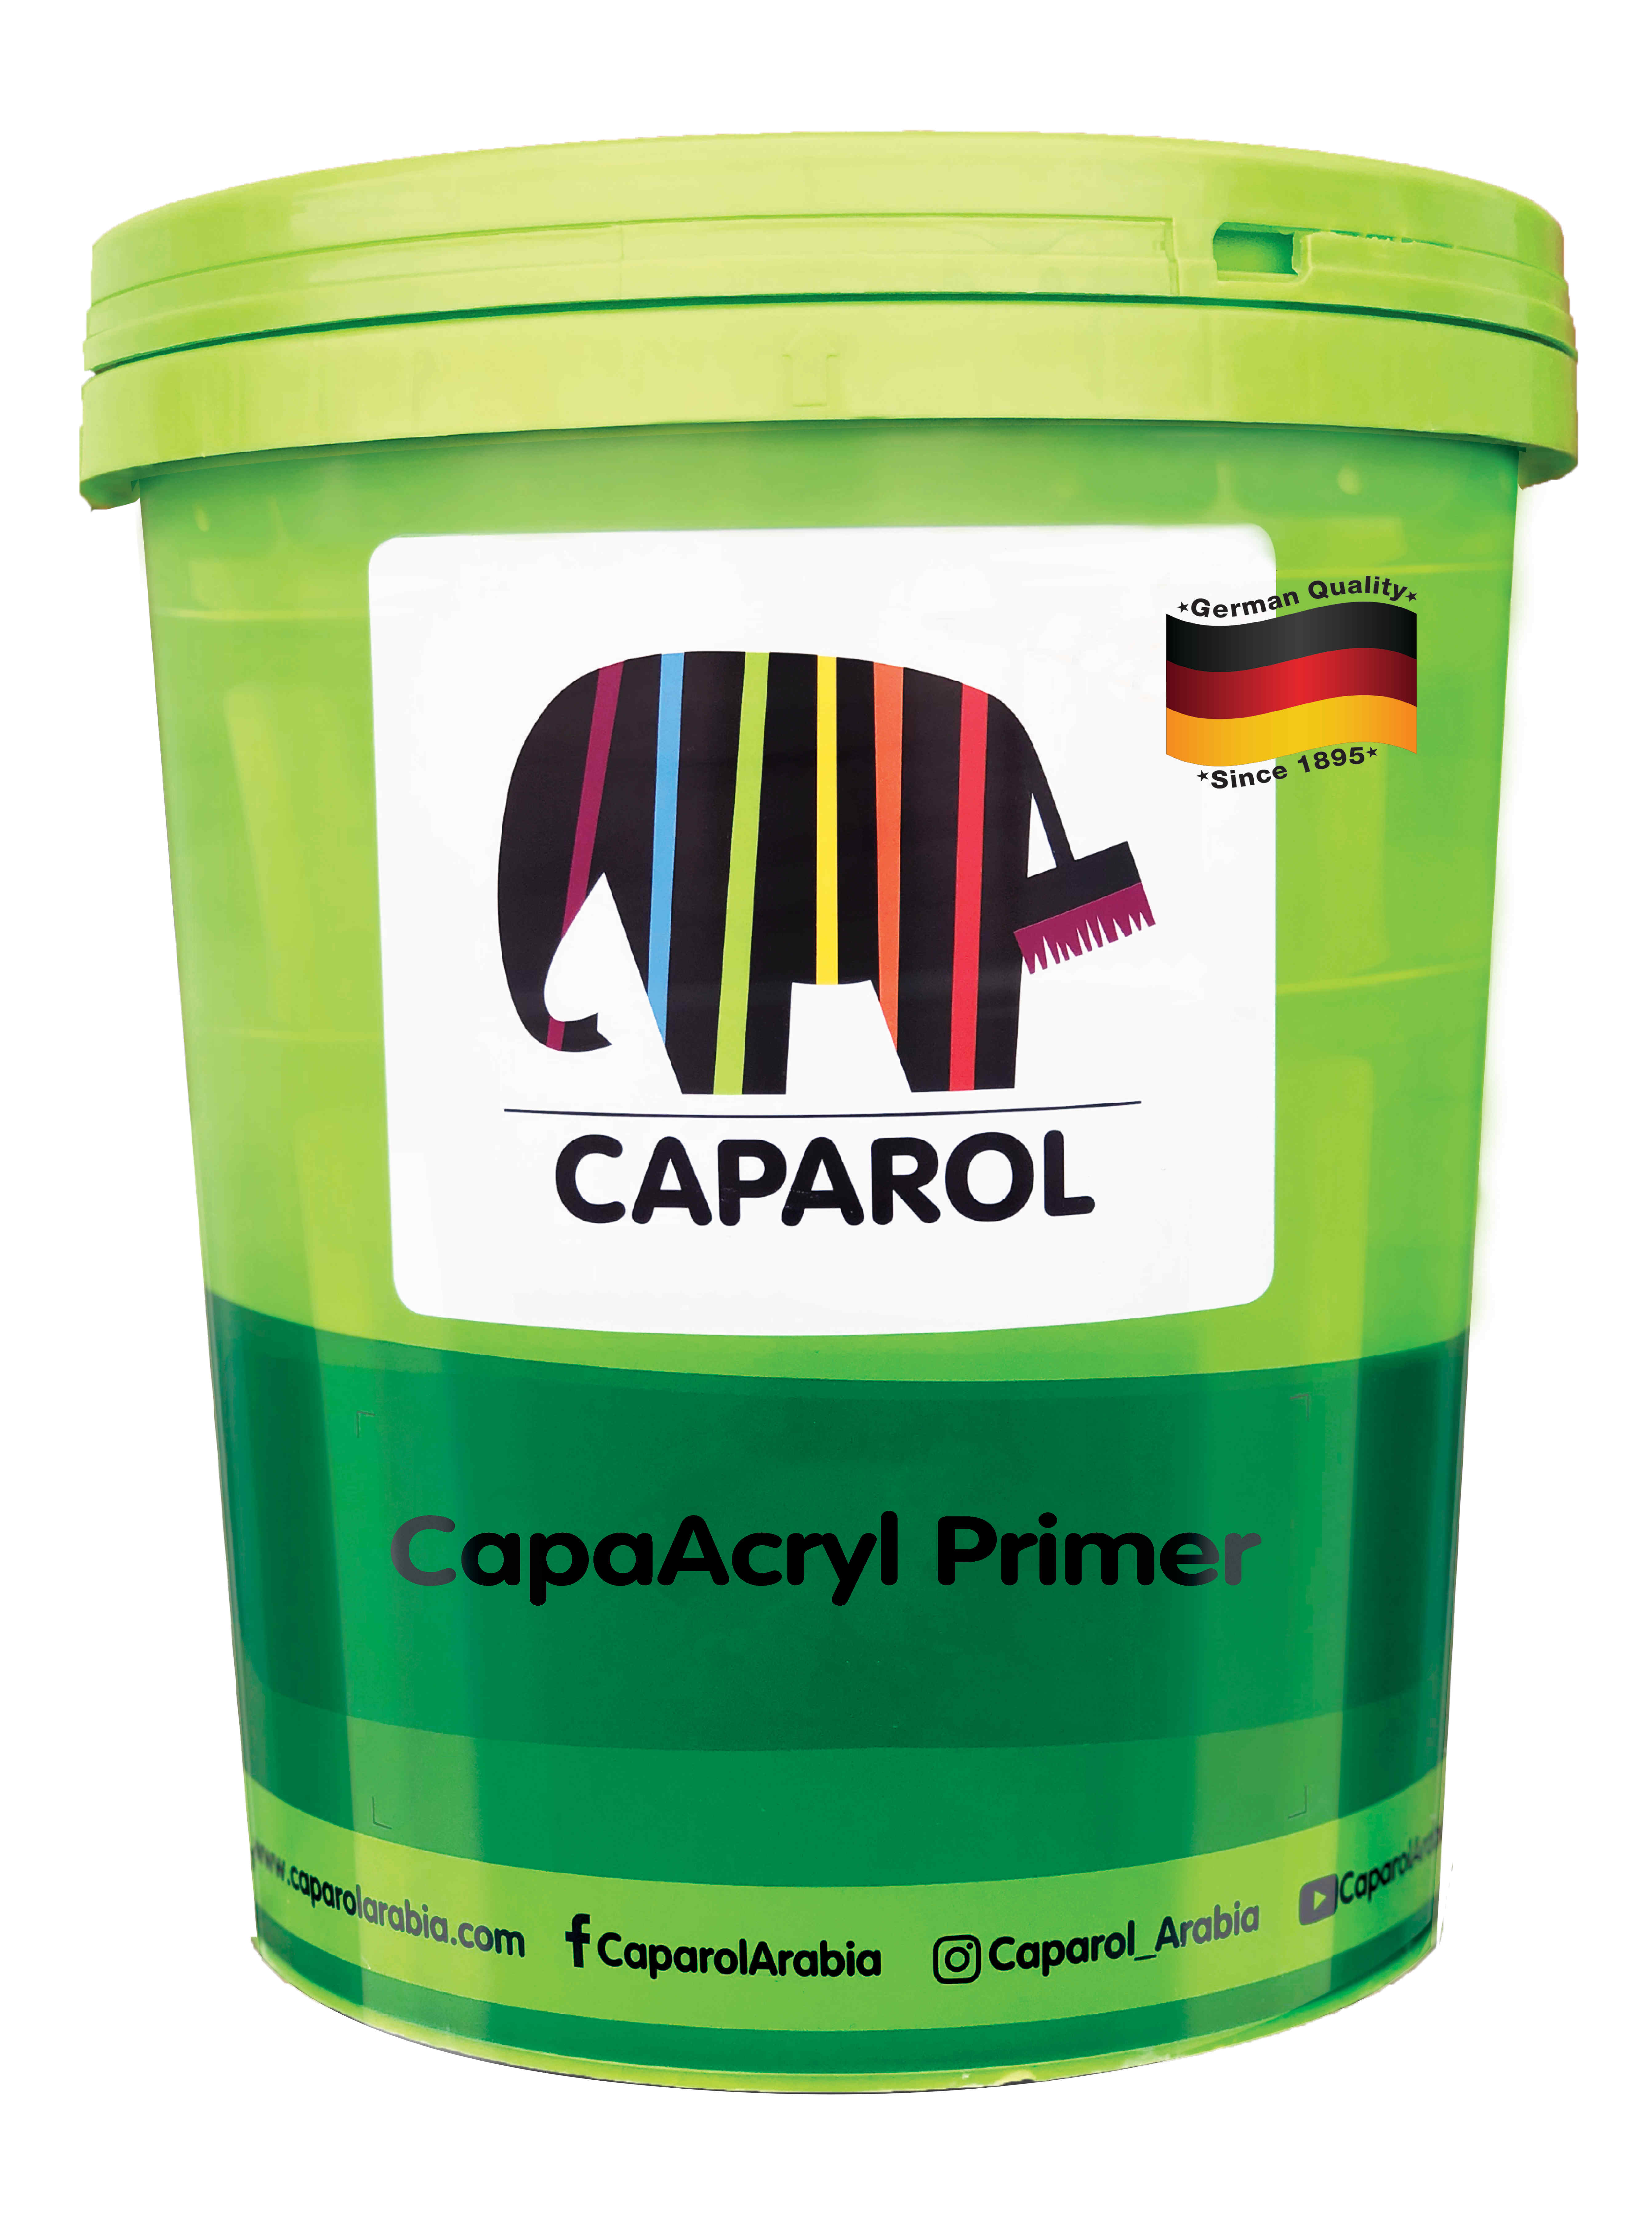 CapaAcryl Primer - Adhesion promoting acrylic primer for use on EXTERIOR & INTERIOR